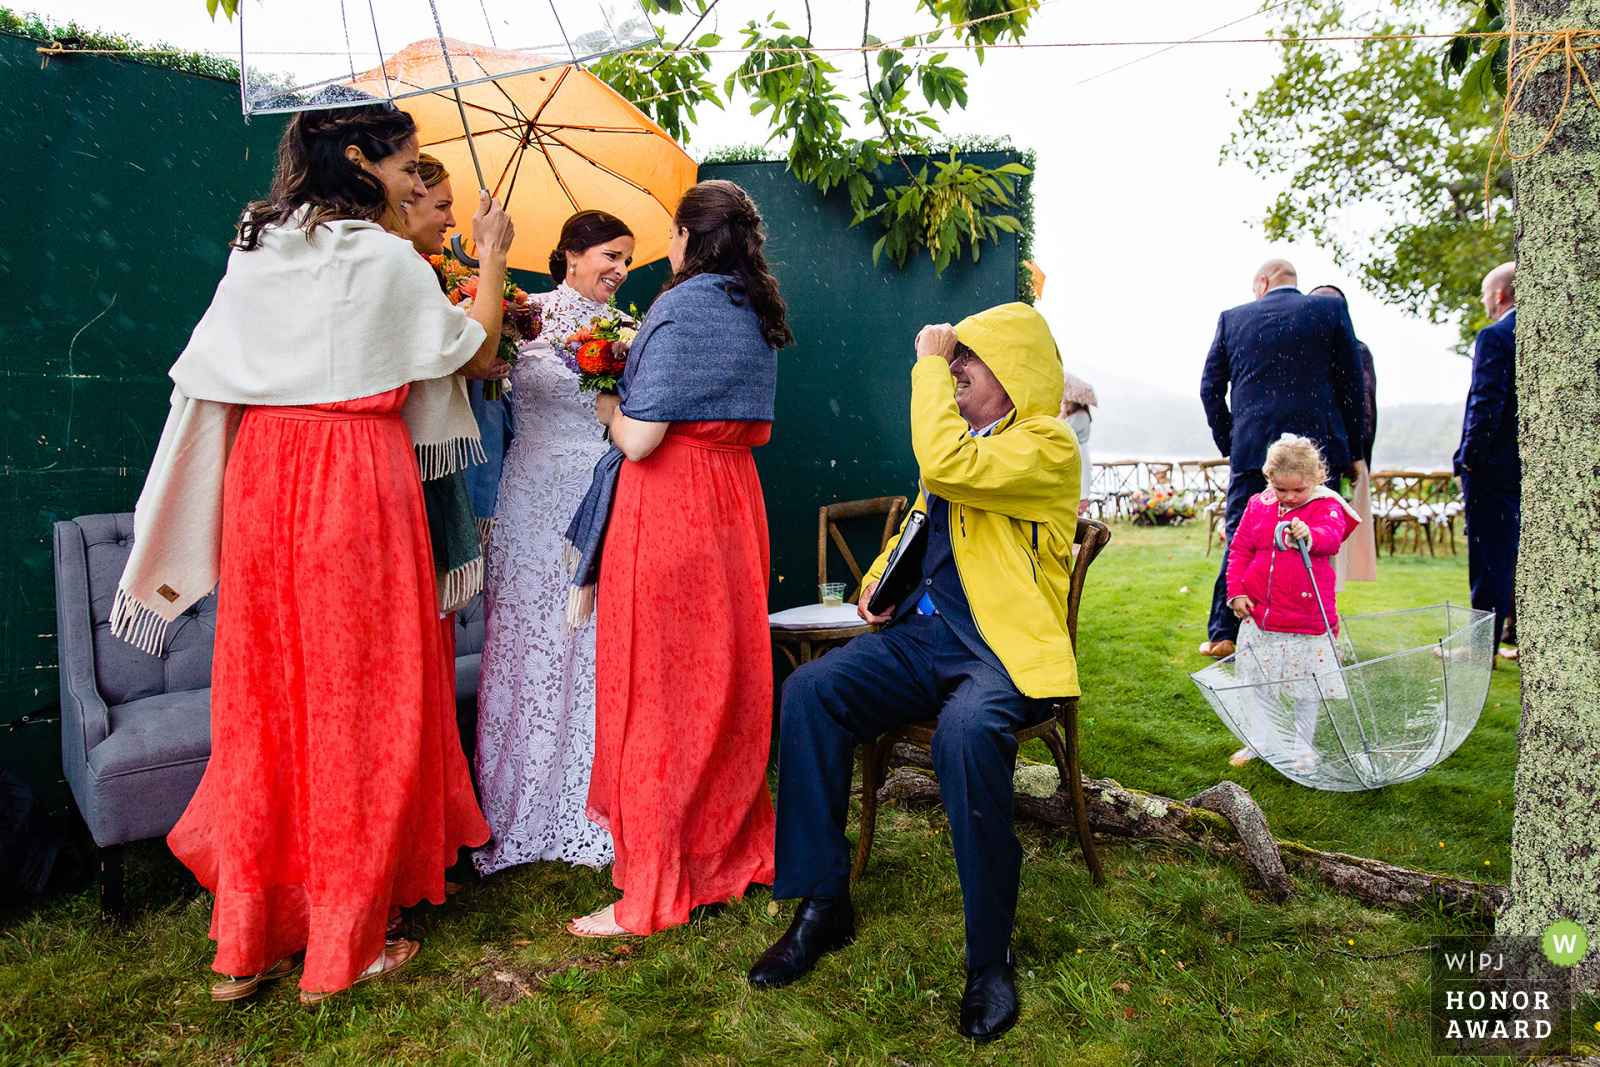 Everyone reacts to the rain at a Blue Hill Maine wedding